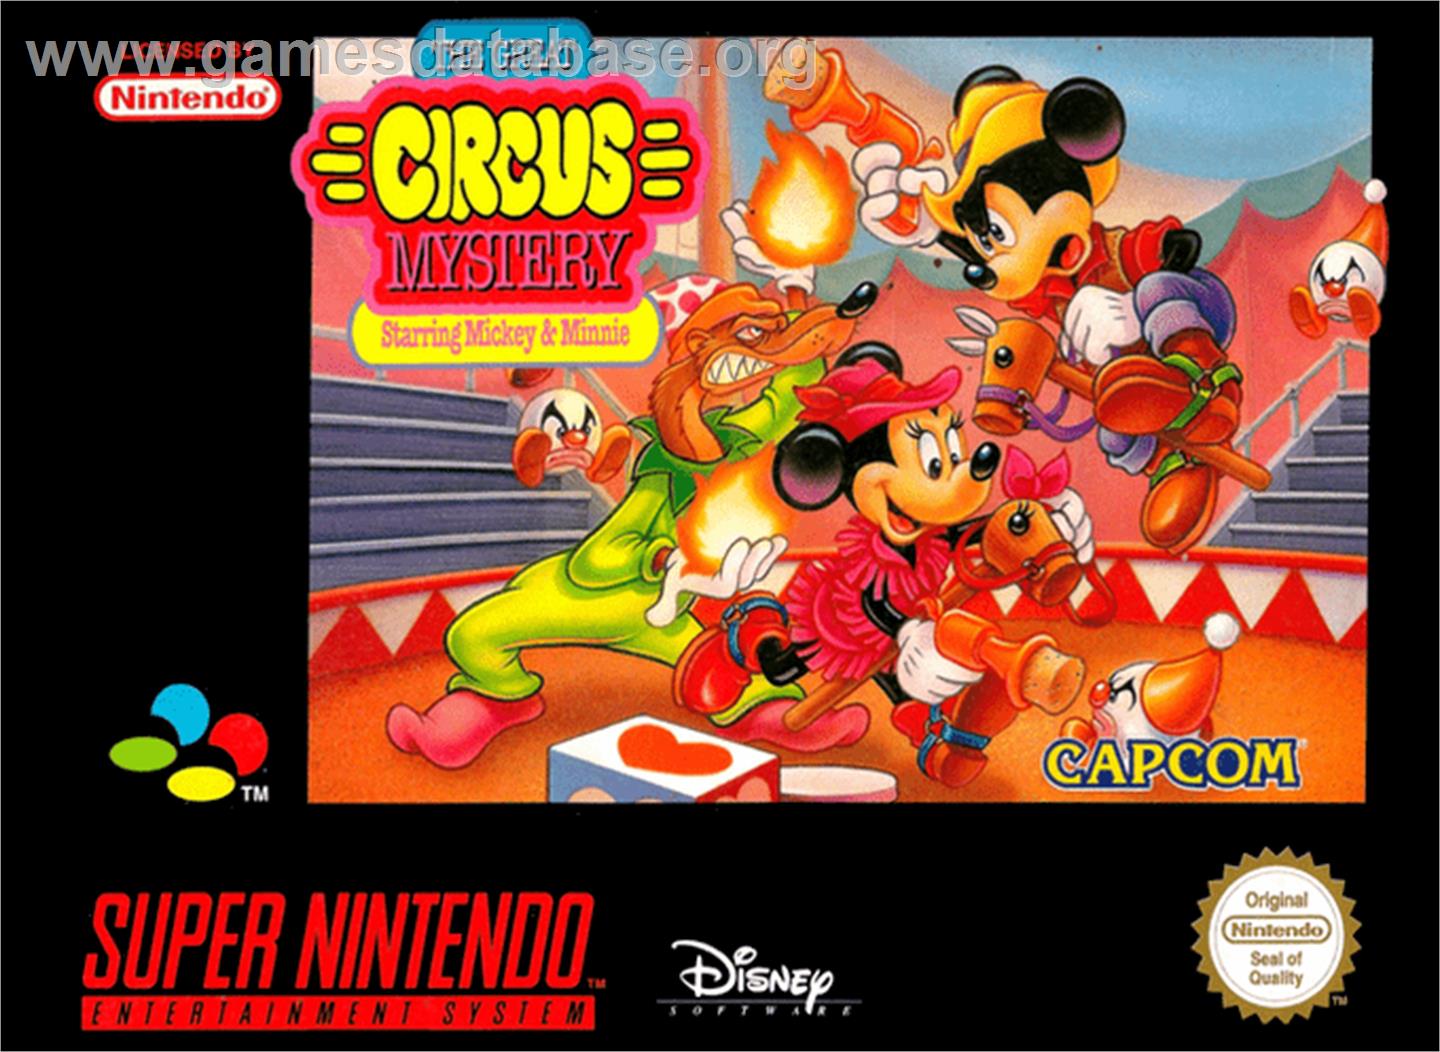 The Great Circus Mystery starring Mickey and Minnie Mouse - Nintendo SNES - Artwork - Box